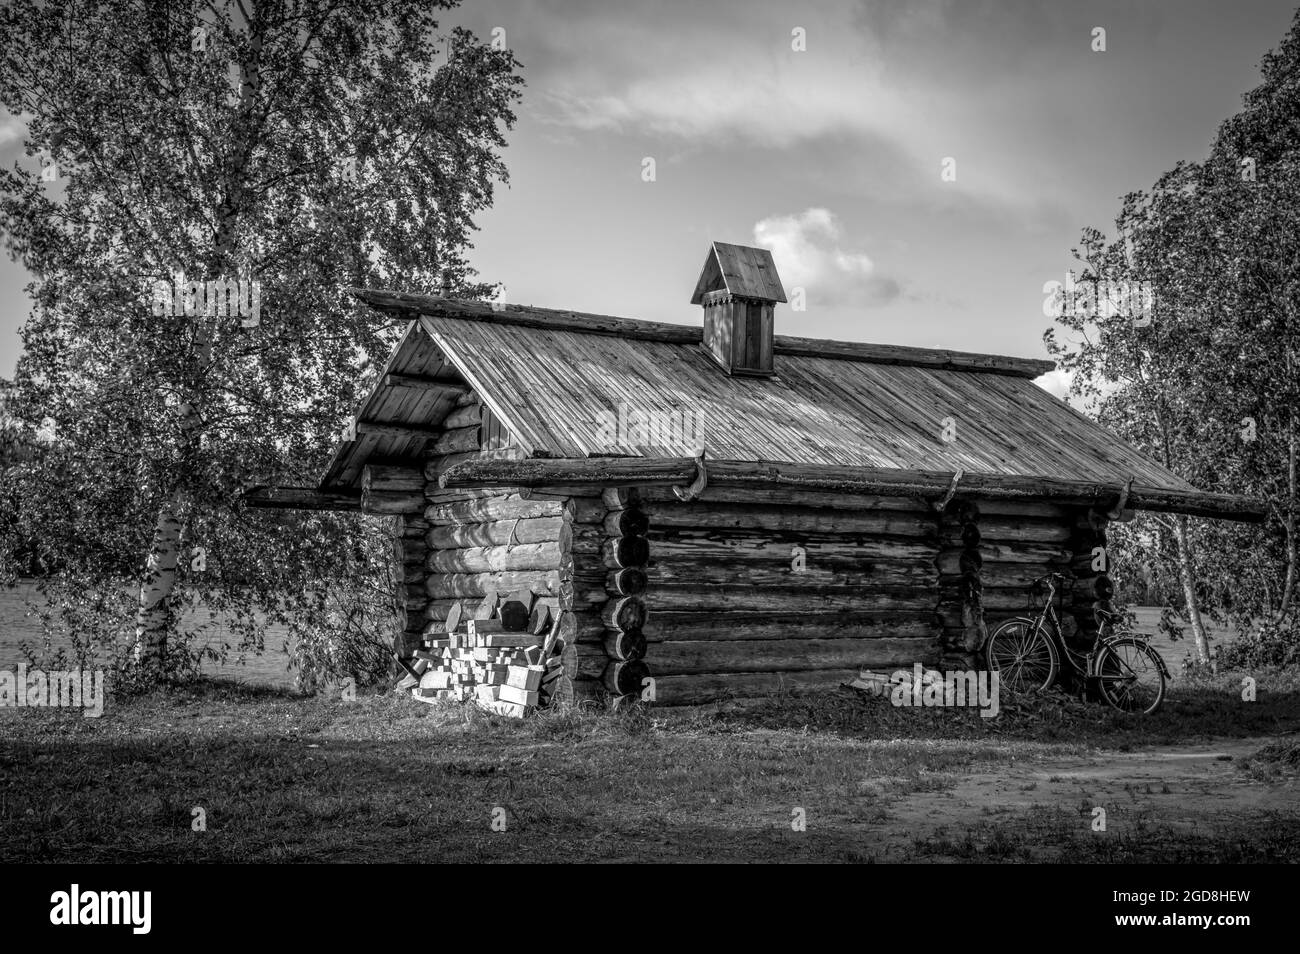 Ancient wooden house on the bank of the Svir river. Mandrogi Village, Russia. Black and white. Stock Photo